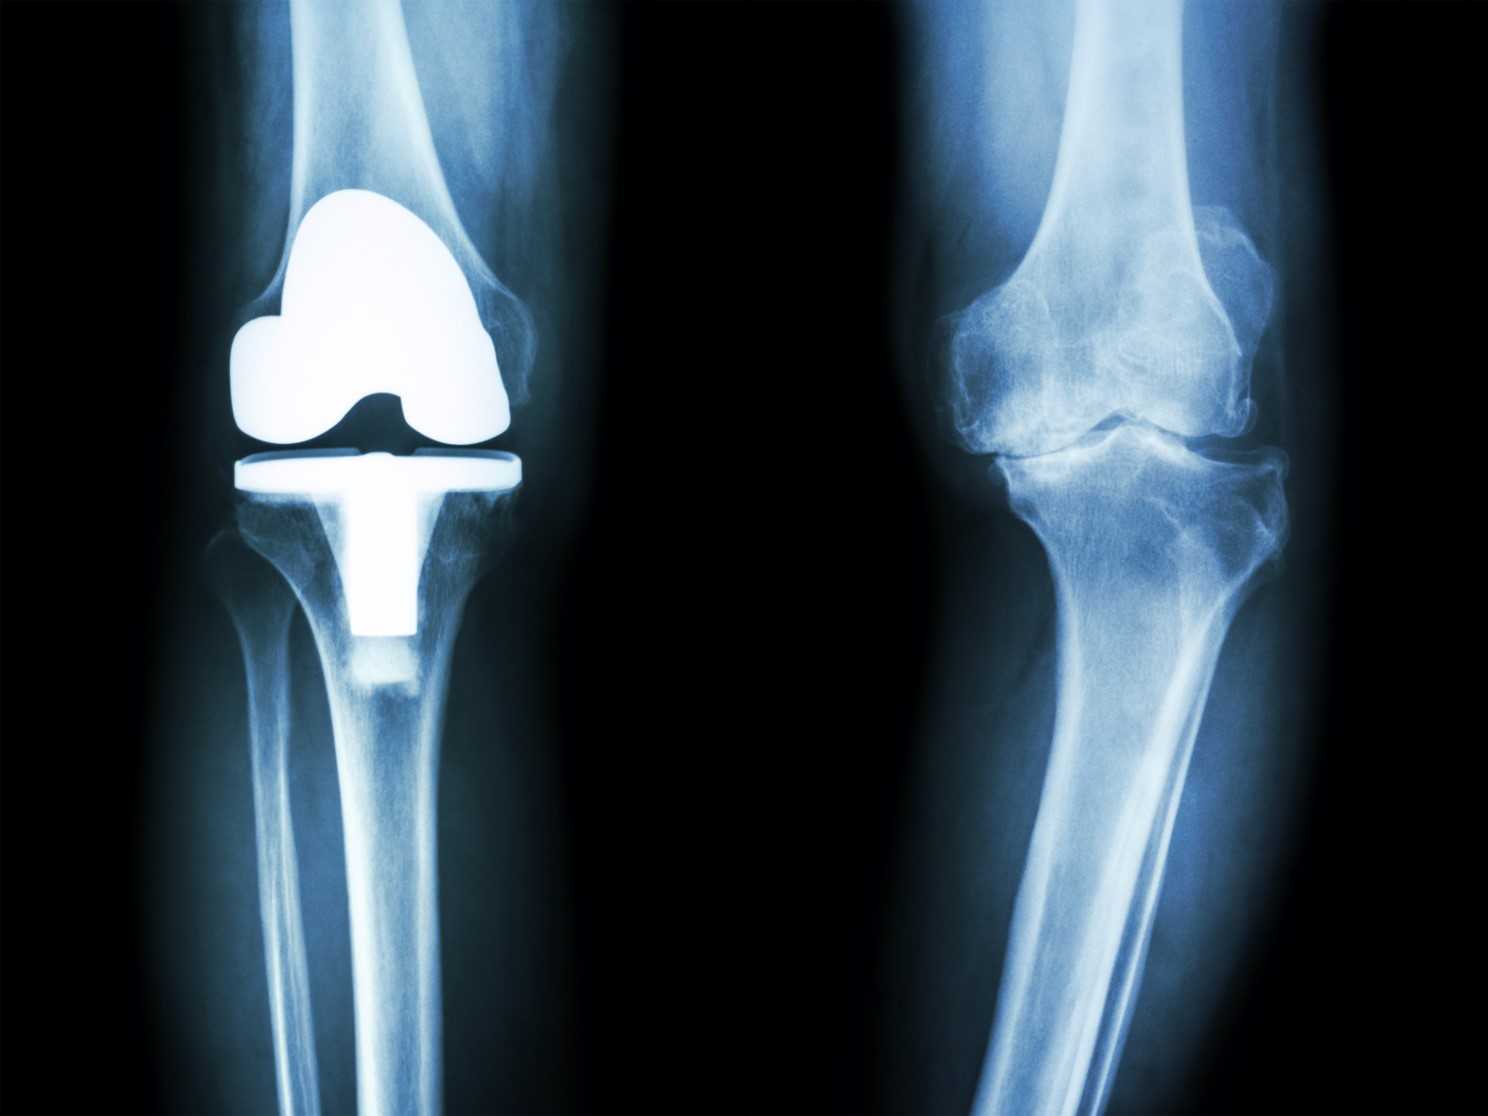 Prosthetic knee to be measured optically